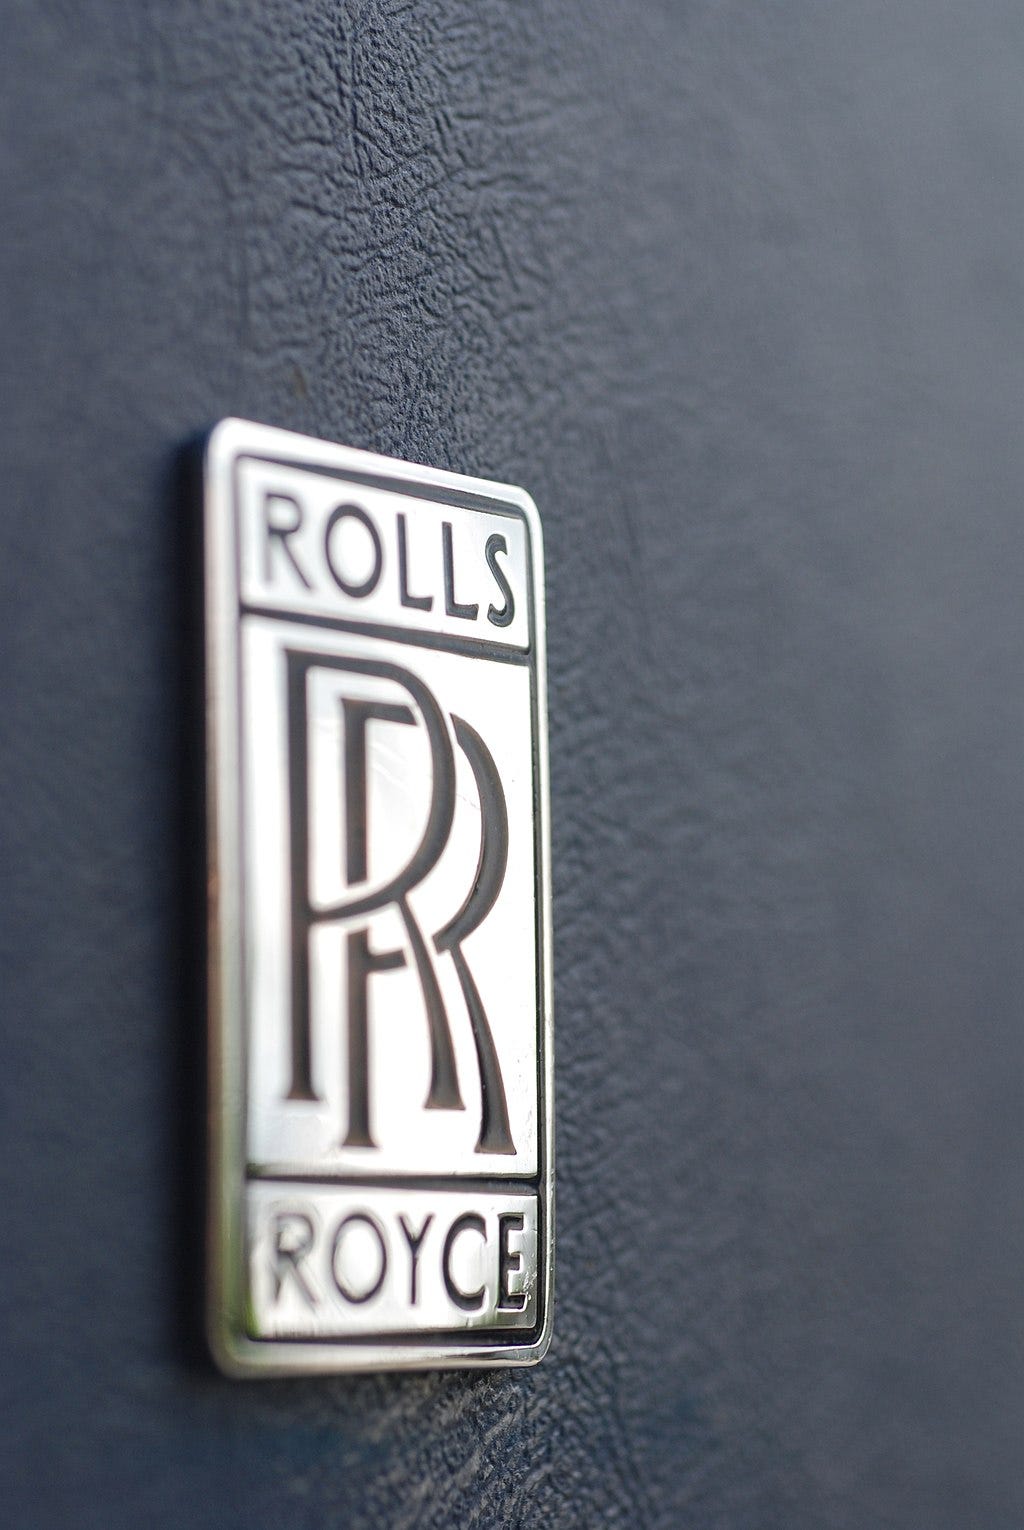 Rolls-Royce Small Nuclear Reactor Likely To Win UK Approval